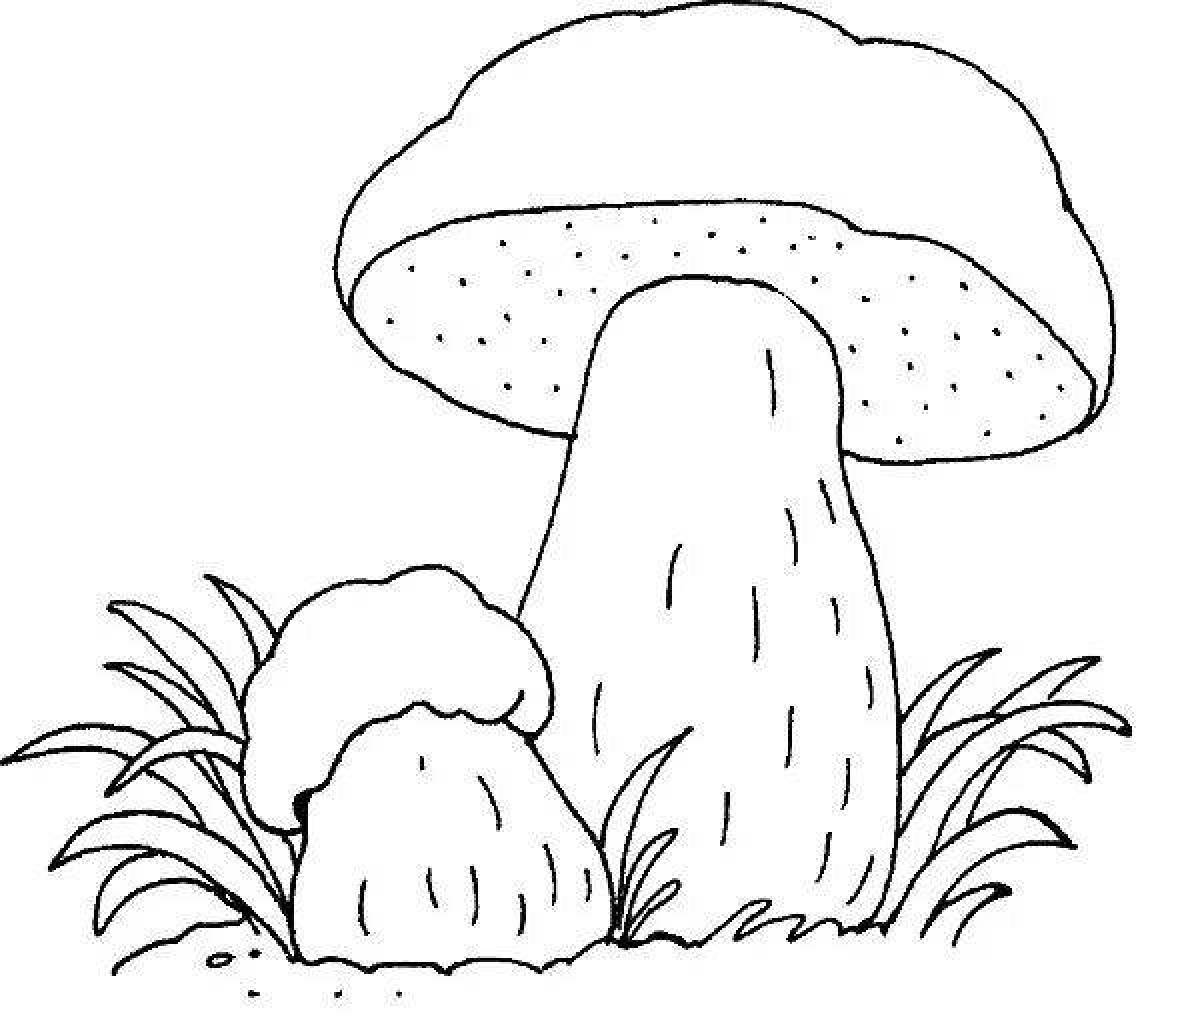 Dazzling white mushroom coloring page